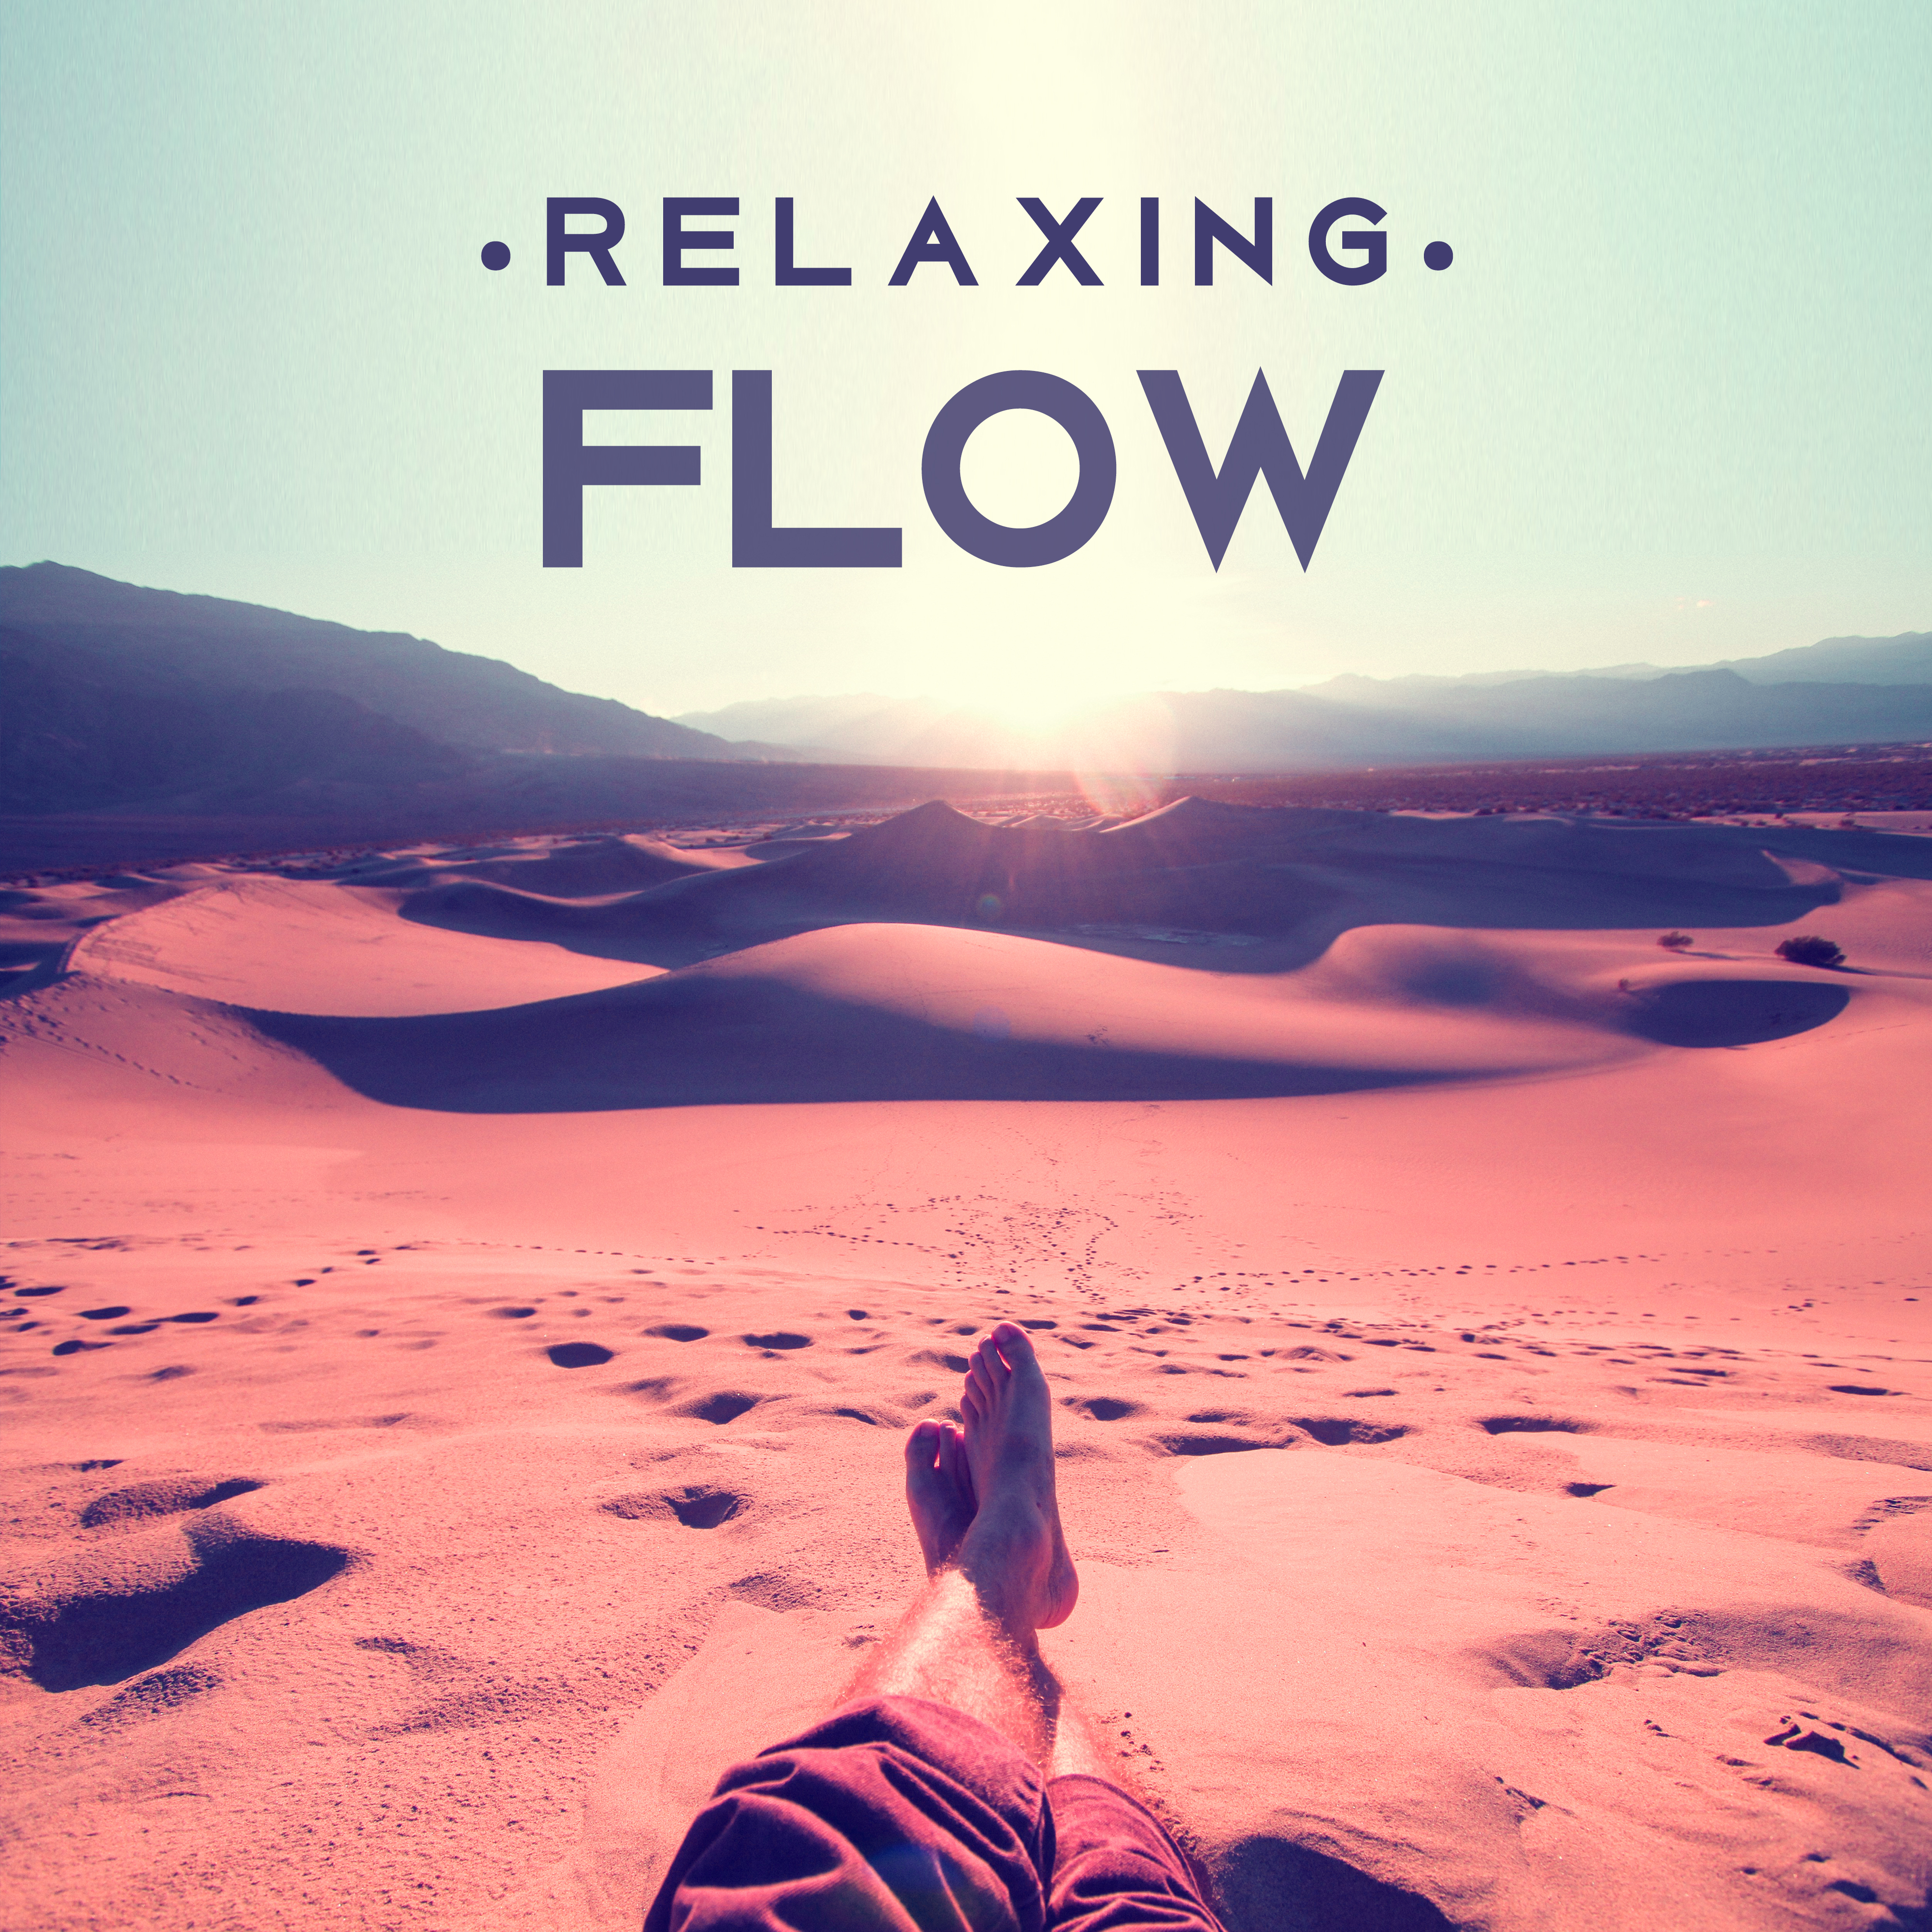 Relaxing Flow – New Age Music, Calming Sounds of Nature, Full Relaxation, Rest After Work